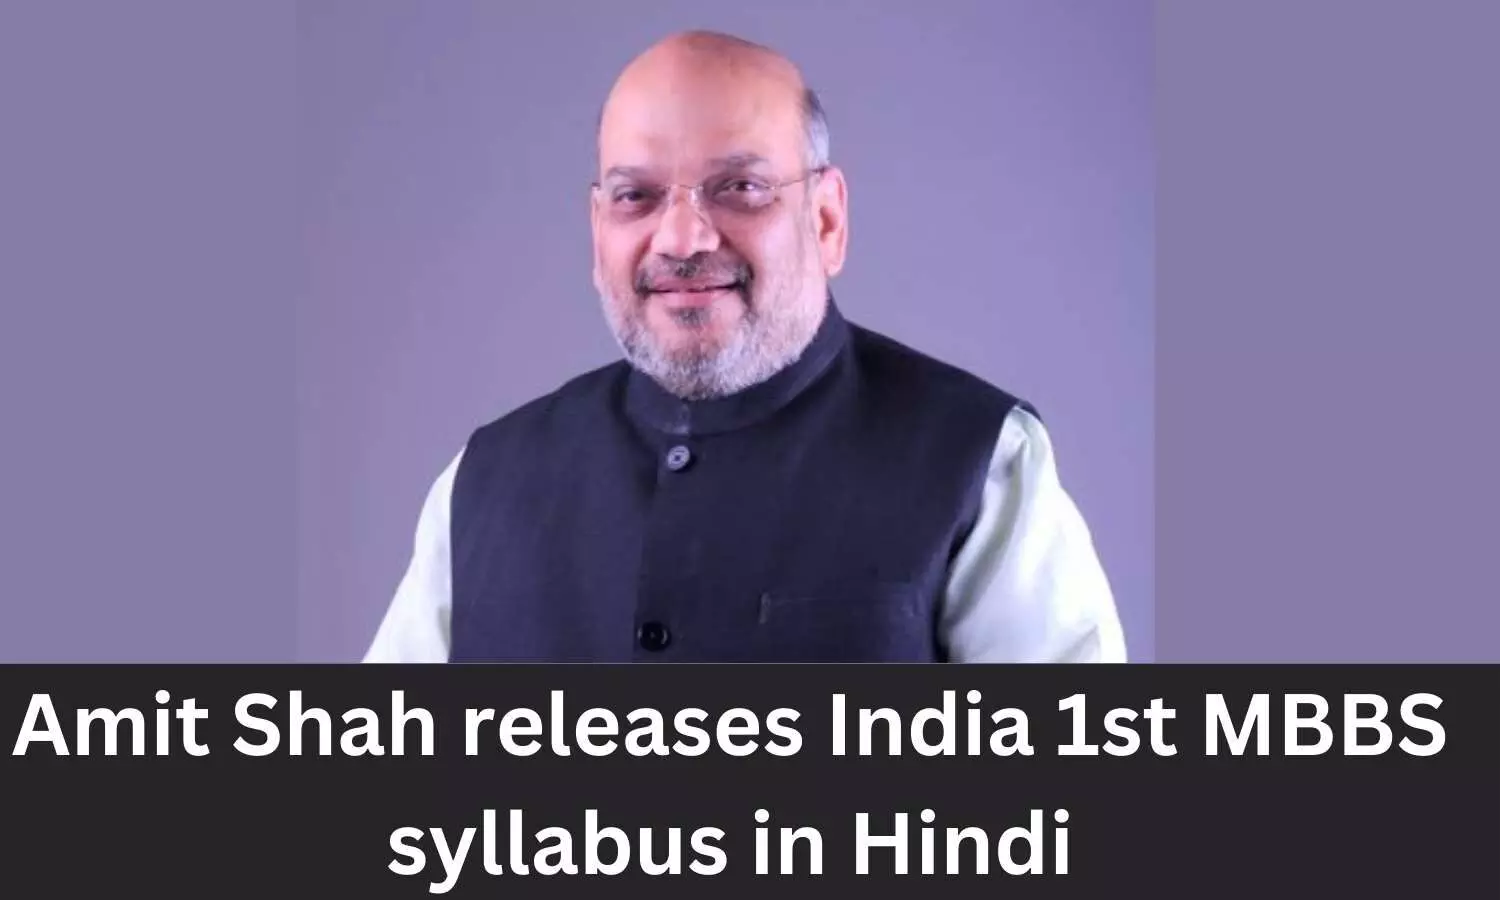 Amit Shah releases Indias 1st MBBS syllabus in Hindi